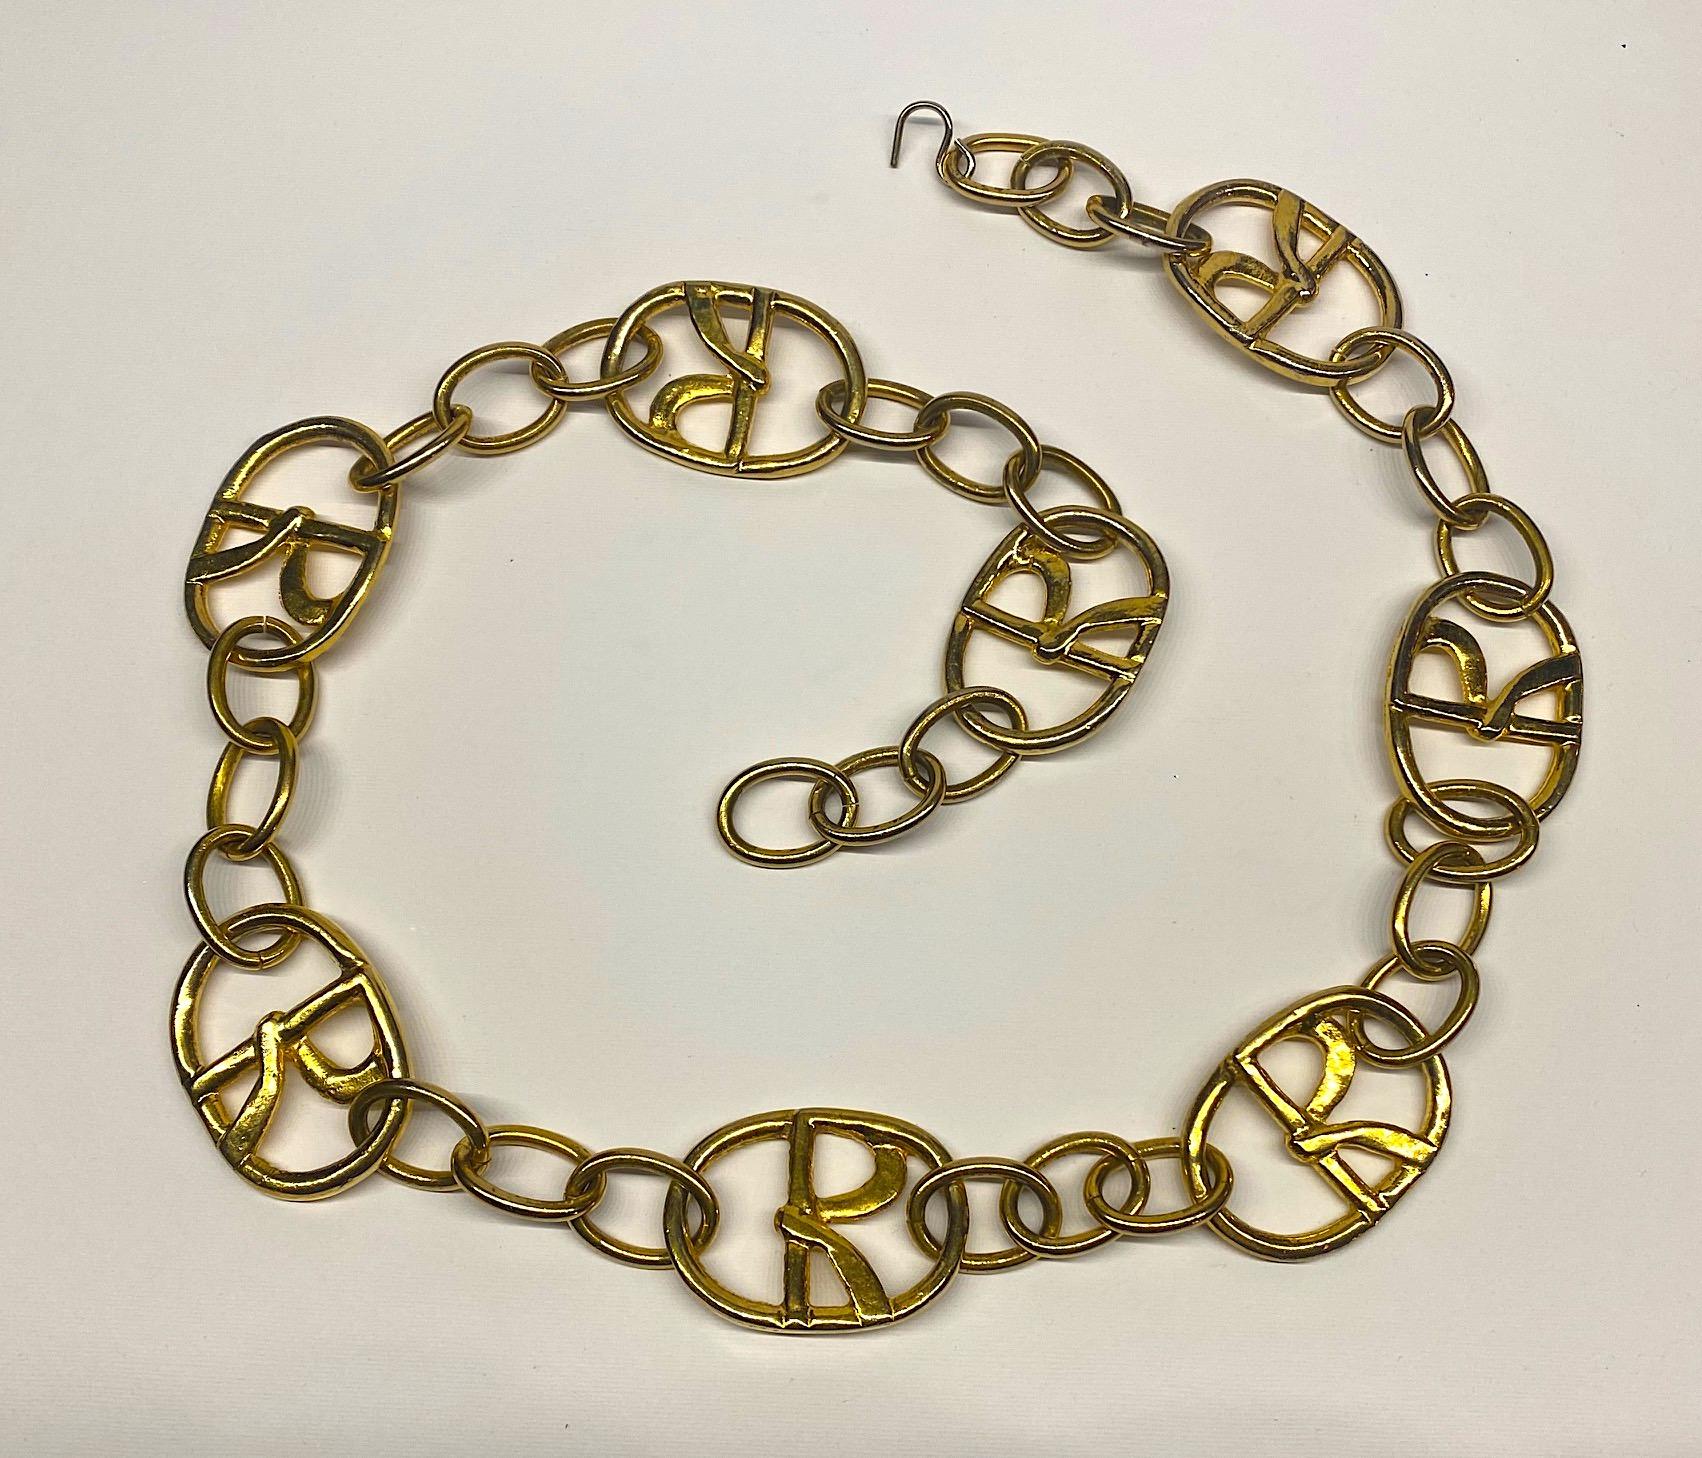 A rare wide Roberta di Camerino gold link belt from the 1960s to 1970s. The belt is a rare design in that it is a large width. Each smaller oval link is .88 tall by 1.25 inches long. The larger oval links with Roberta's icon wrapped initial 